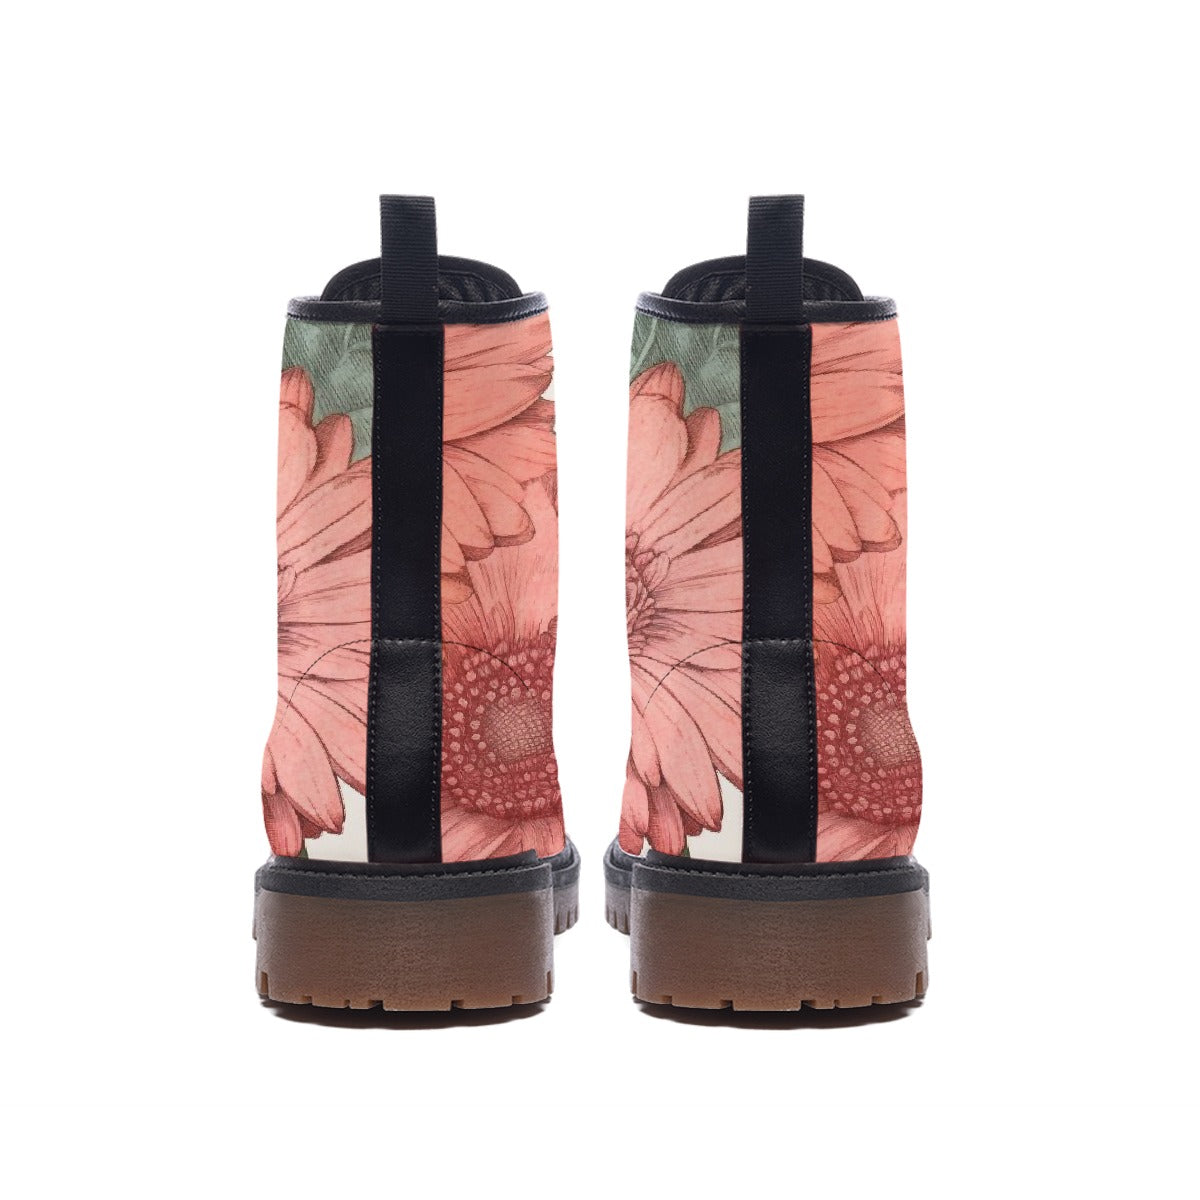 Coral Daisy Combat Boots